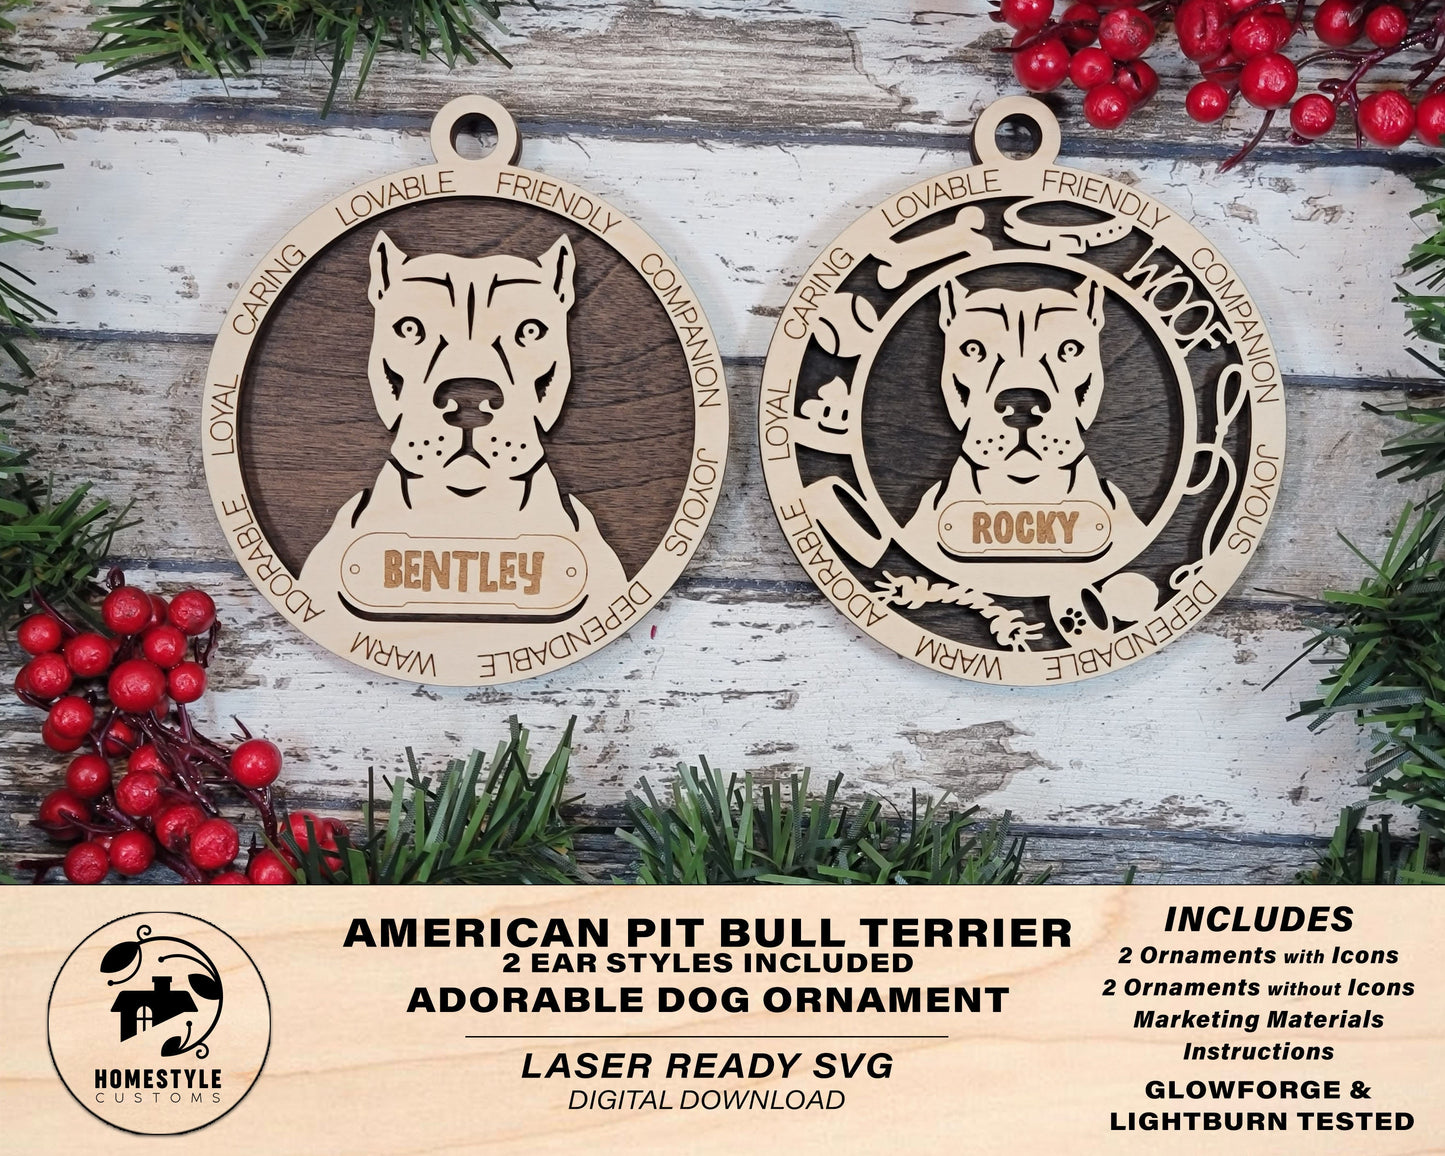 American Pitbull Terrier - Adorable Dog Ornaments - 4 Ornaments included - SVG, PDF, AI File Download - Sized for Glowforge